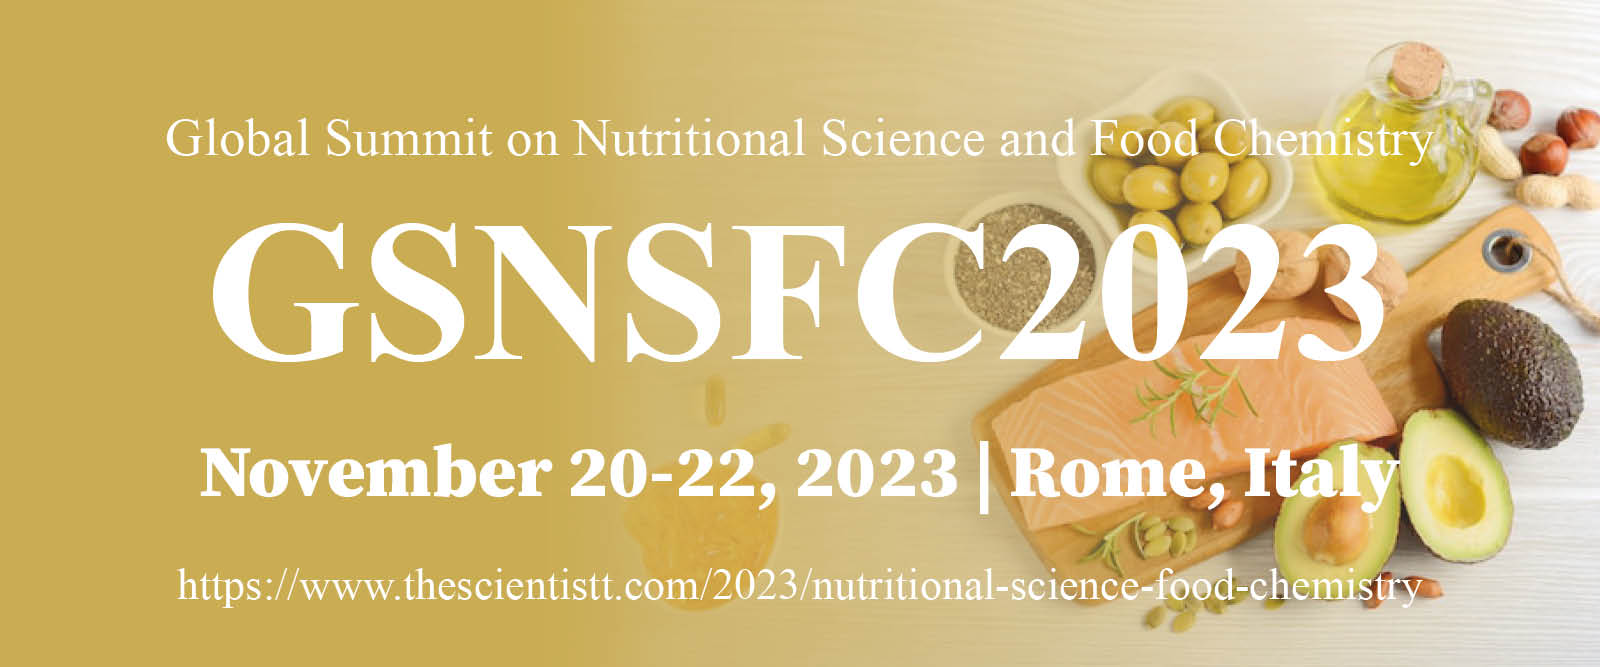 Global Summit on Nutritional Science and Food Chemistry, Rome, Italy